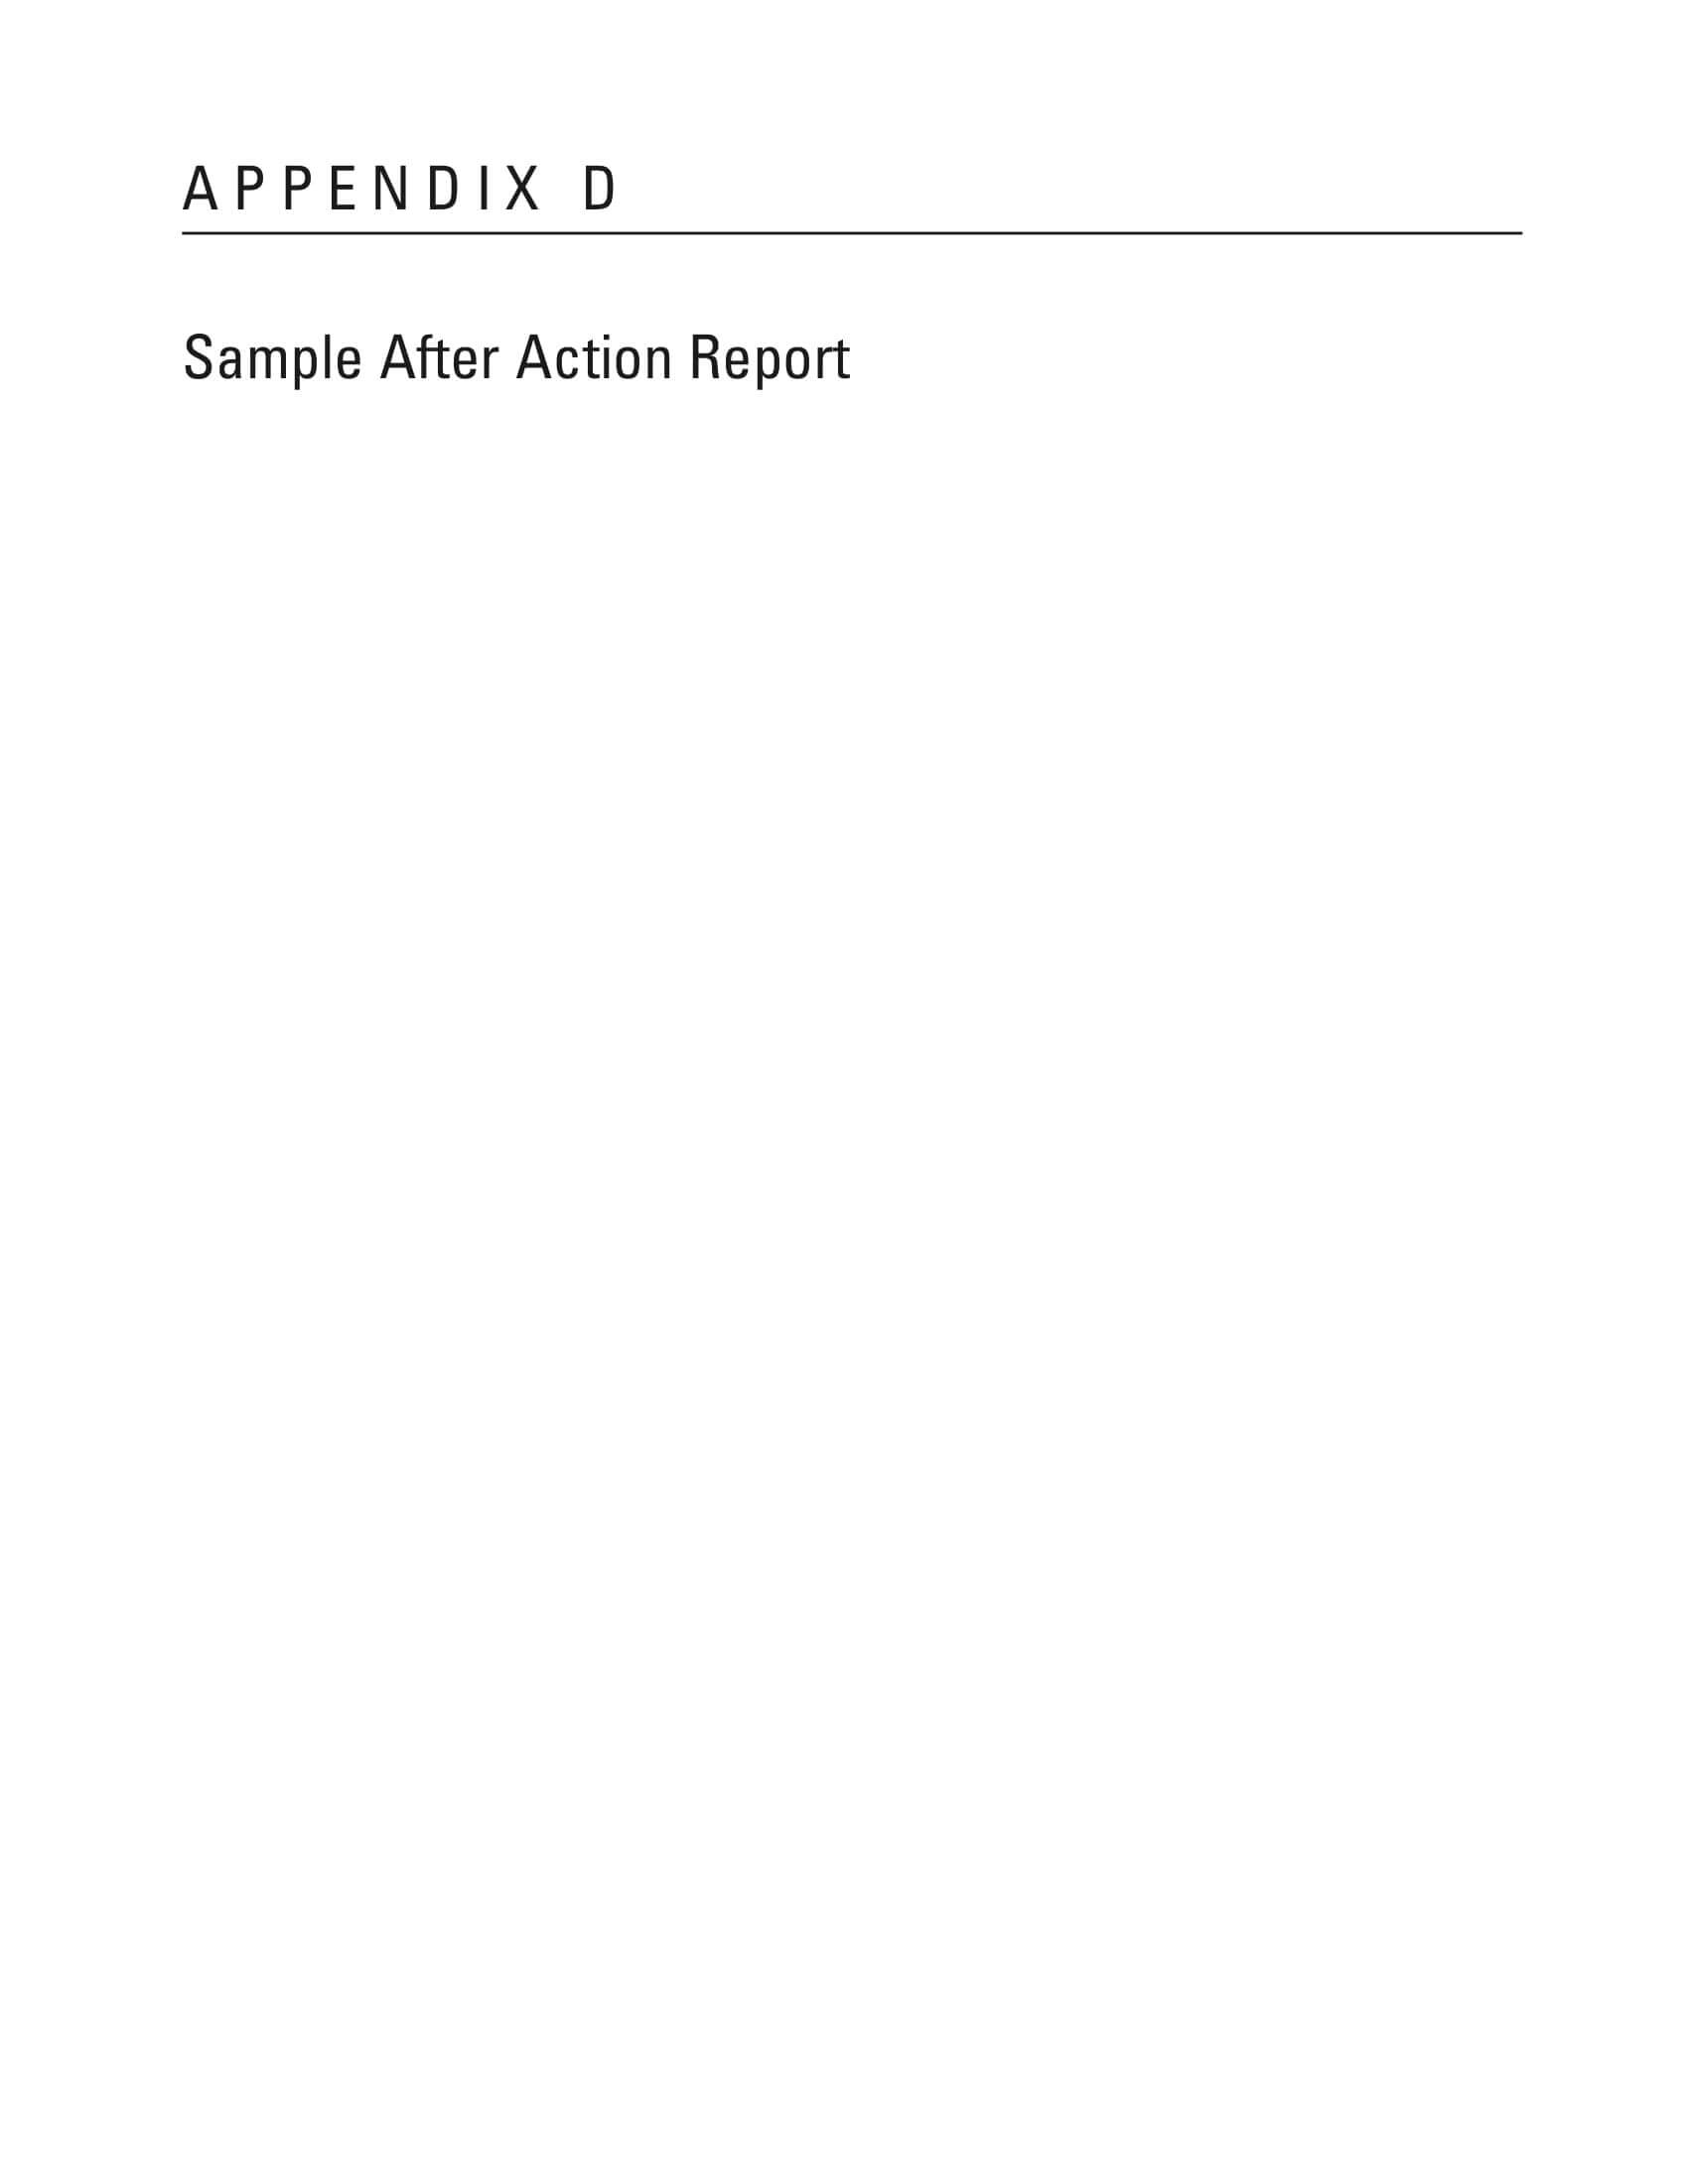 Rma Report Template Awesome Simple After Action Weekly Within Rma Report Template